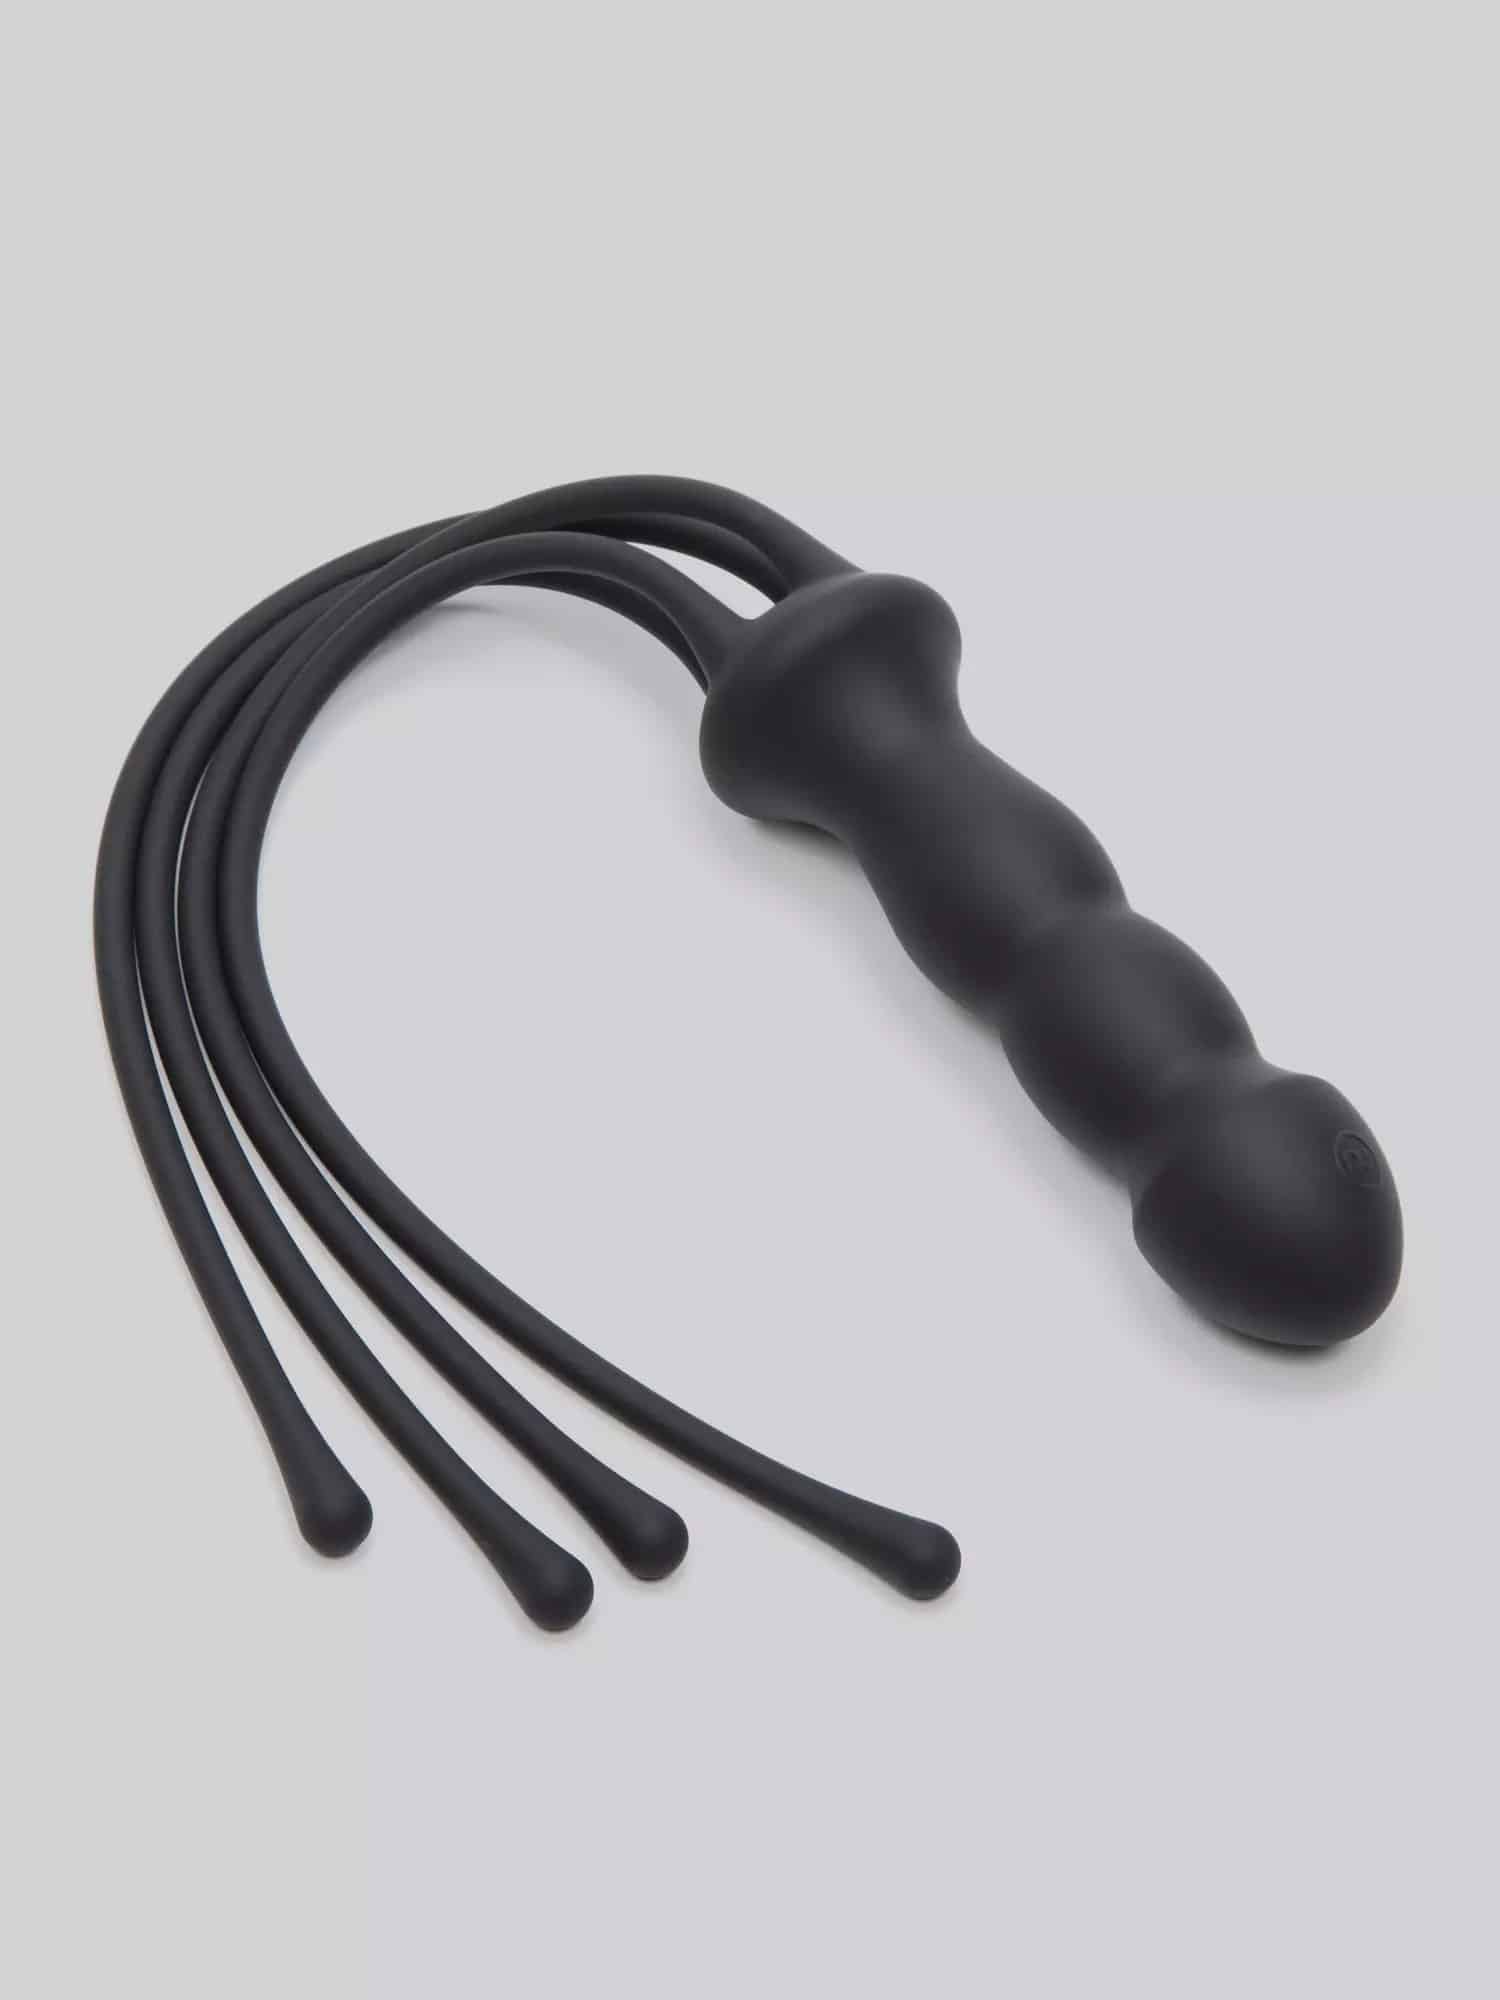 The 10 Best Sadist Toys to Inflict the Most Pleasurable Pain